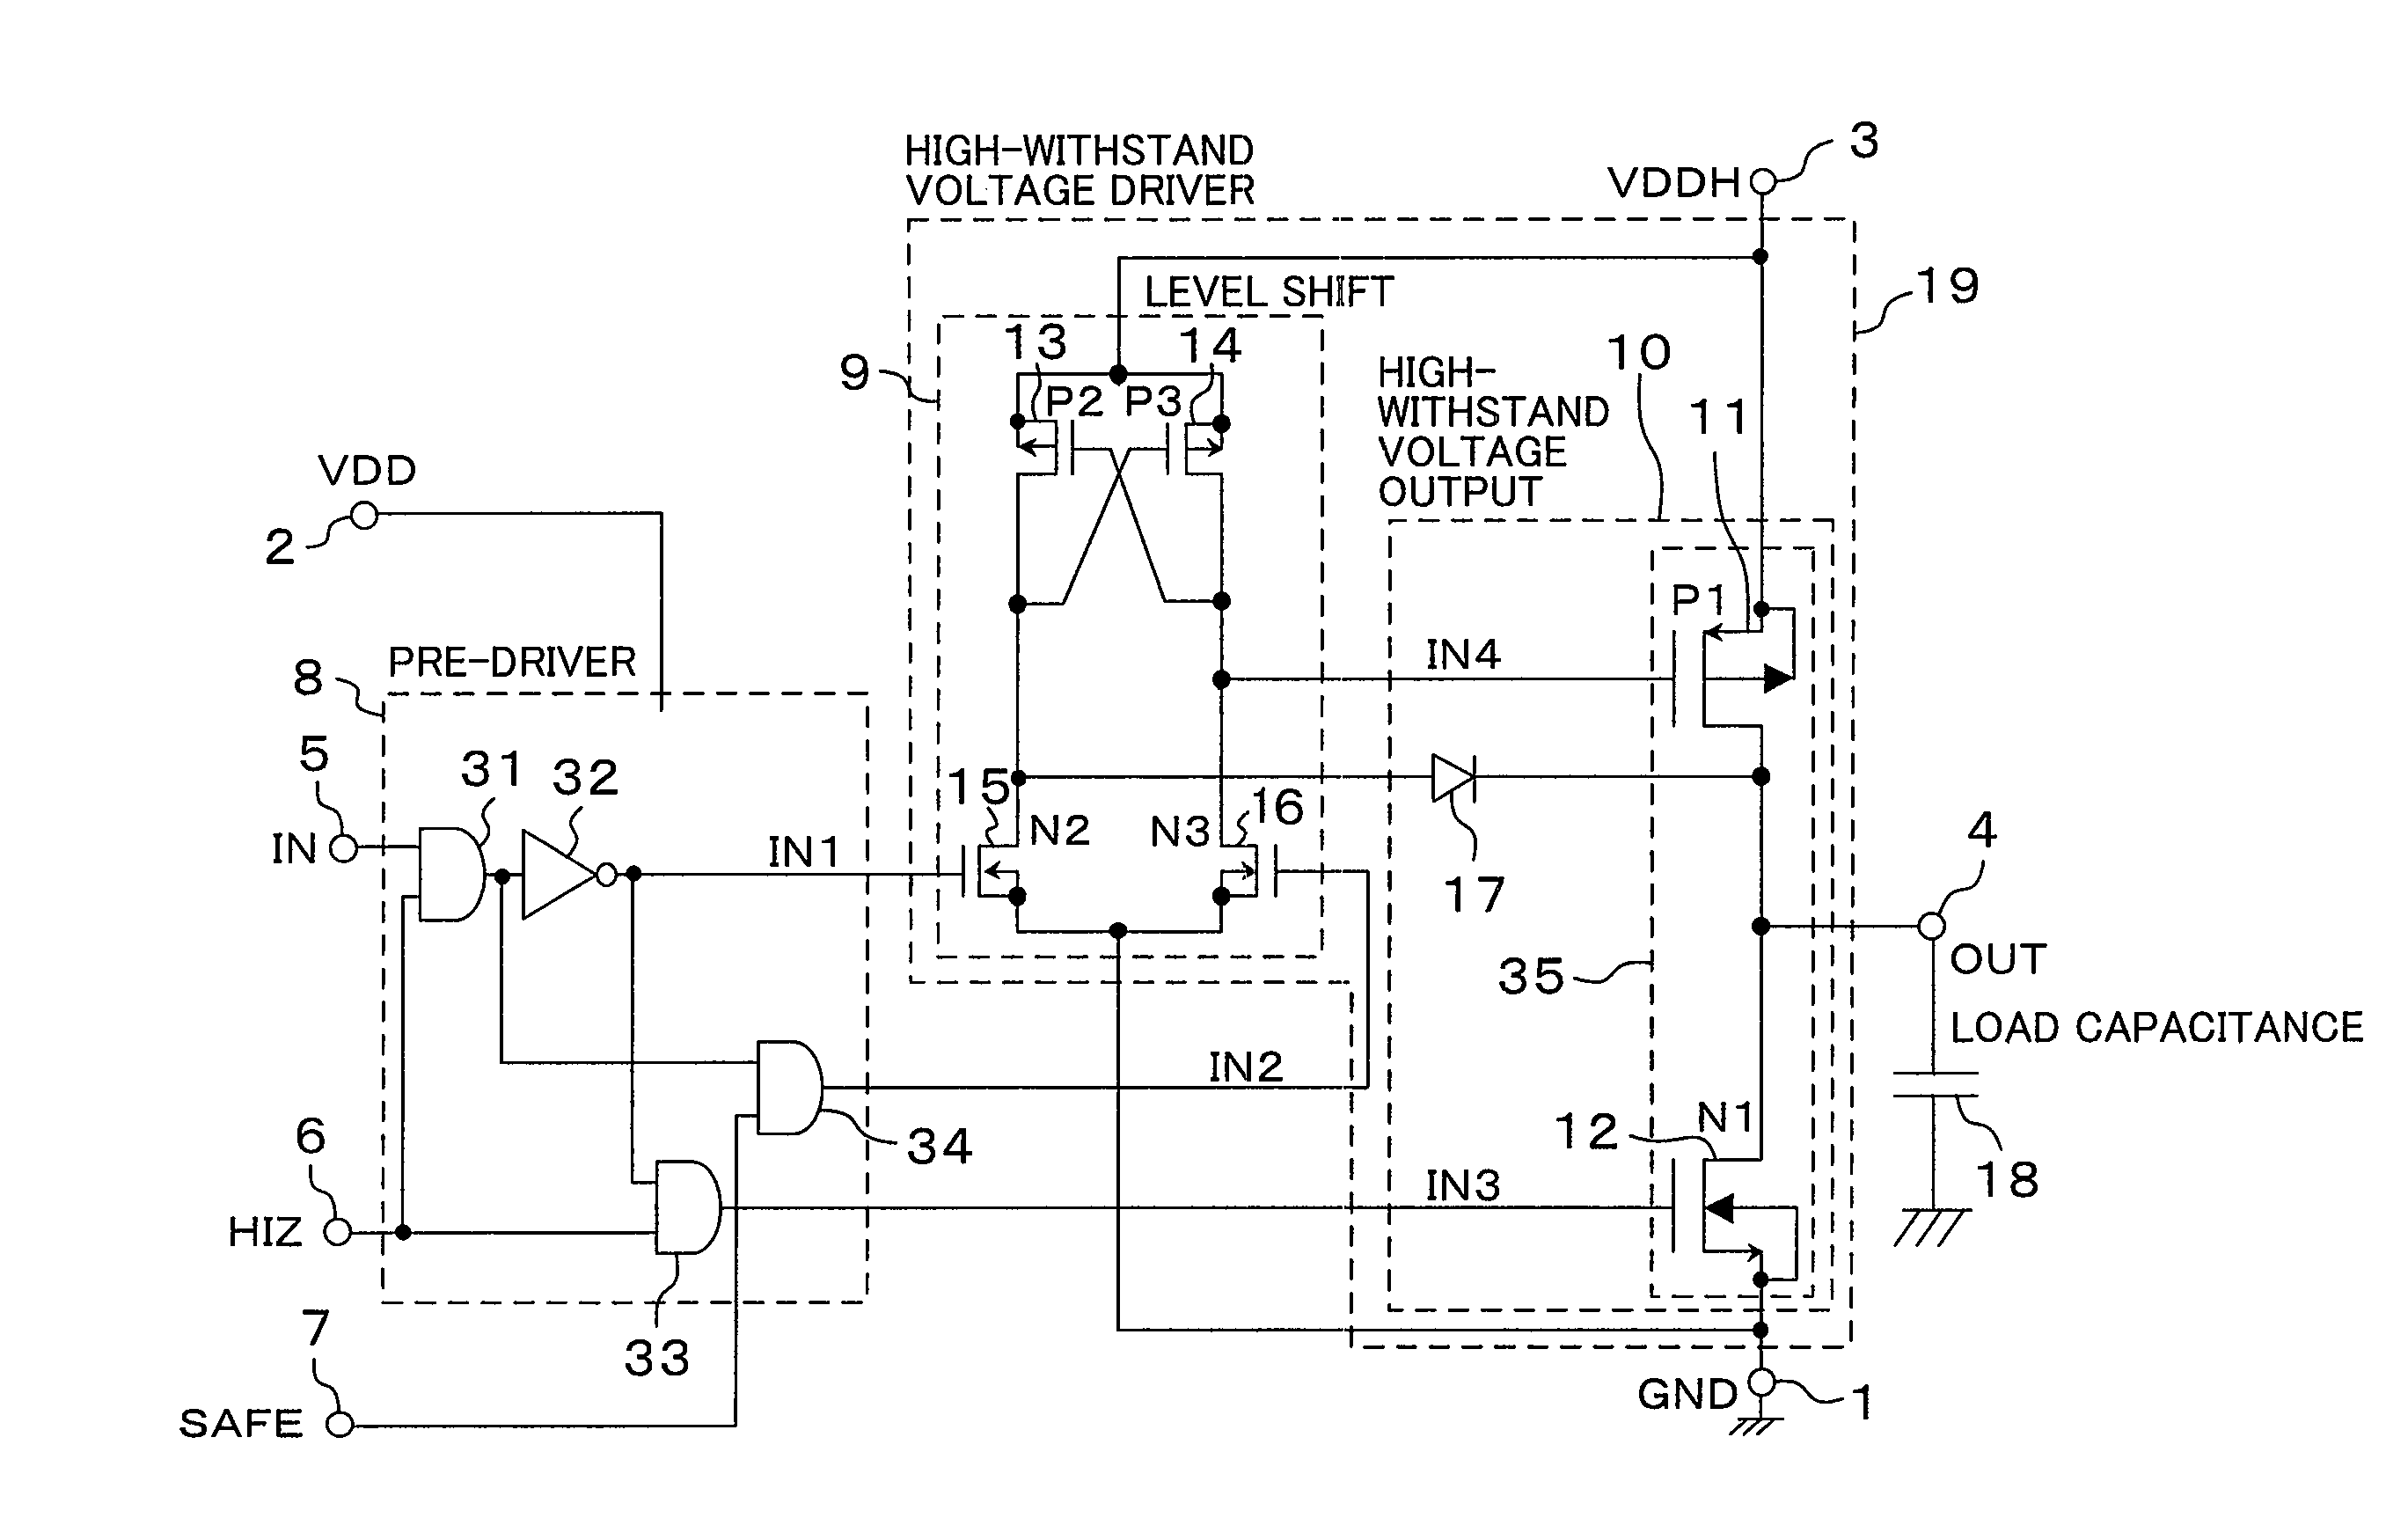 Multi-channel semiconductor integrated circuit